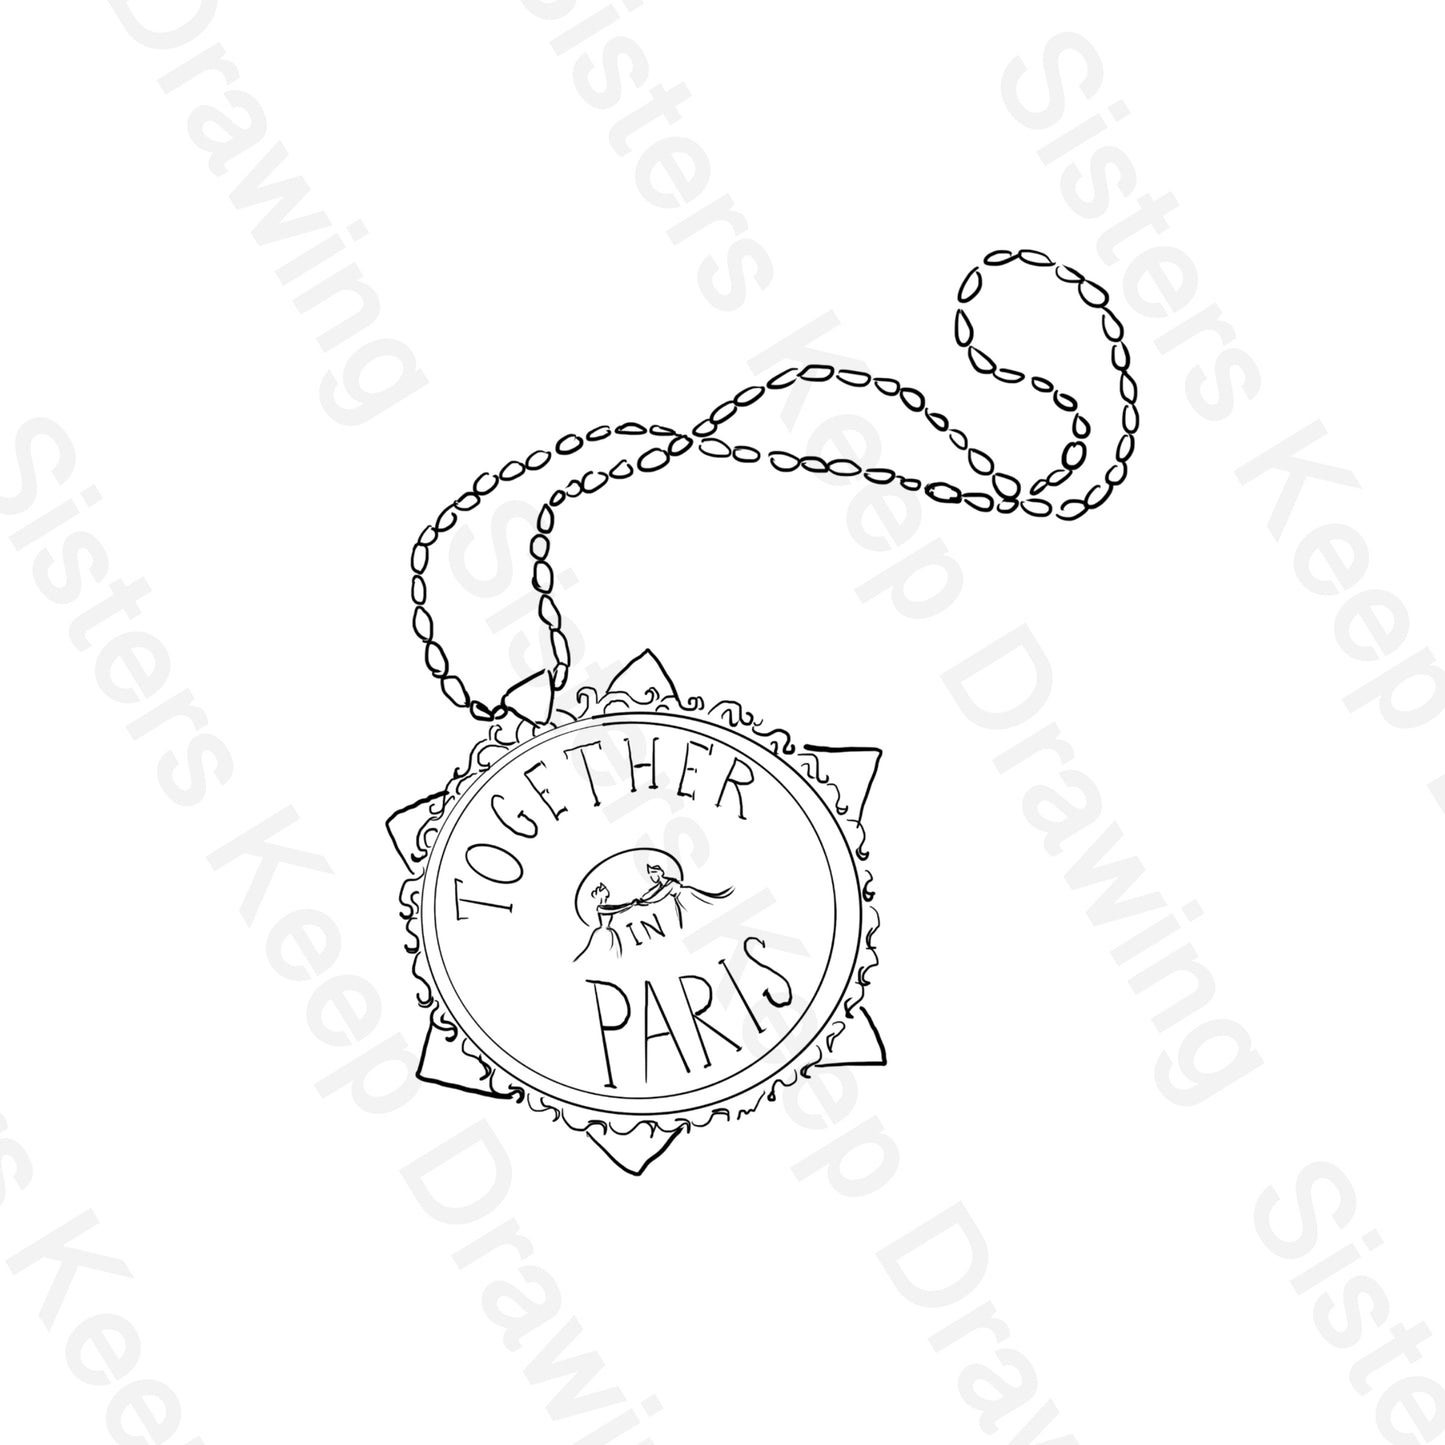 Together in Paris Necklace - Anastasia Inspired Tattoo Transparent Permission PNG